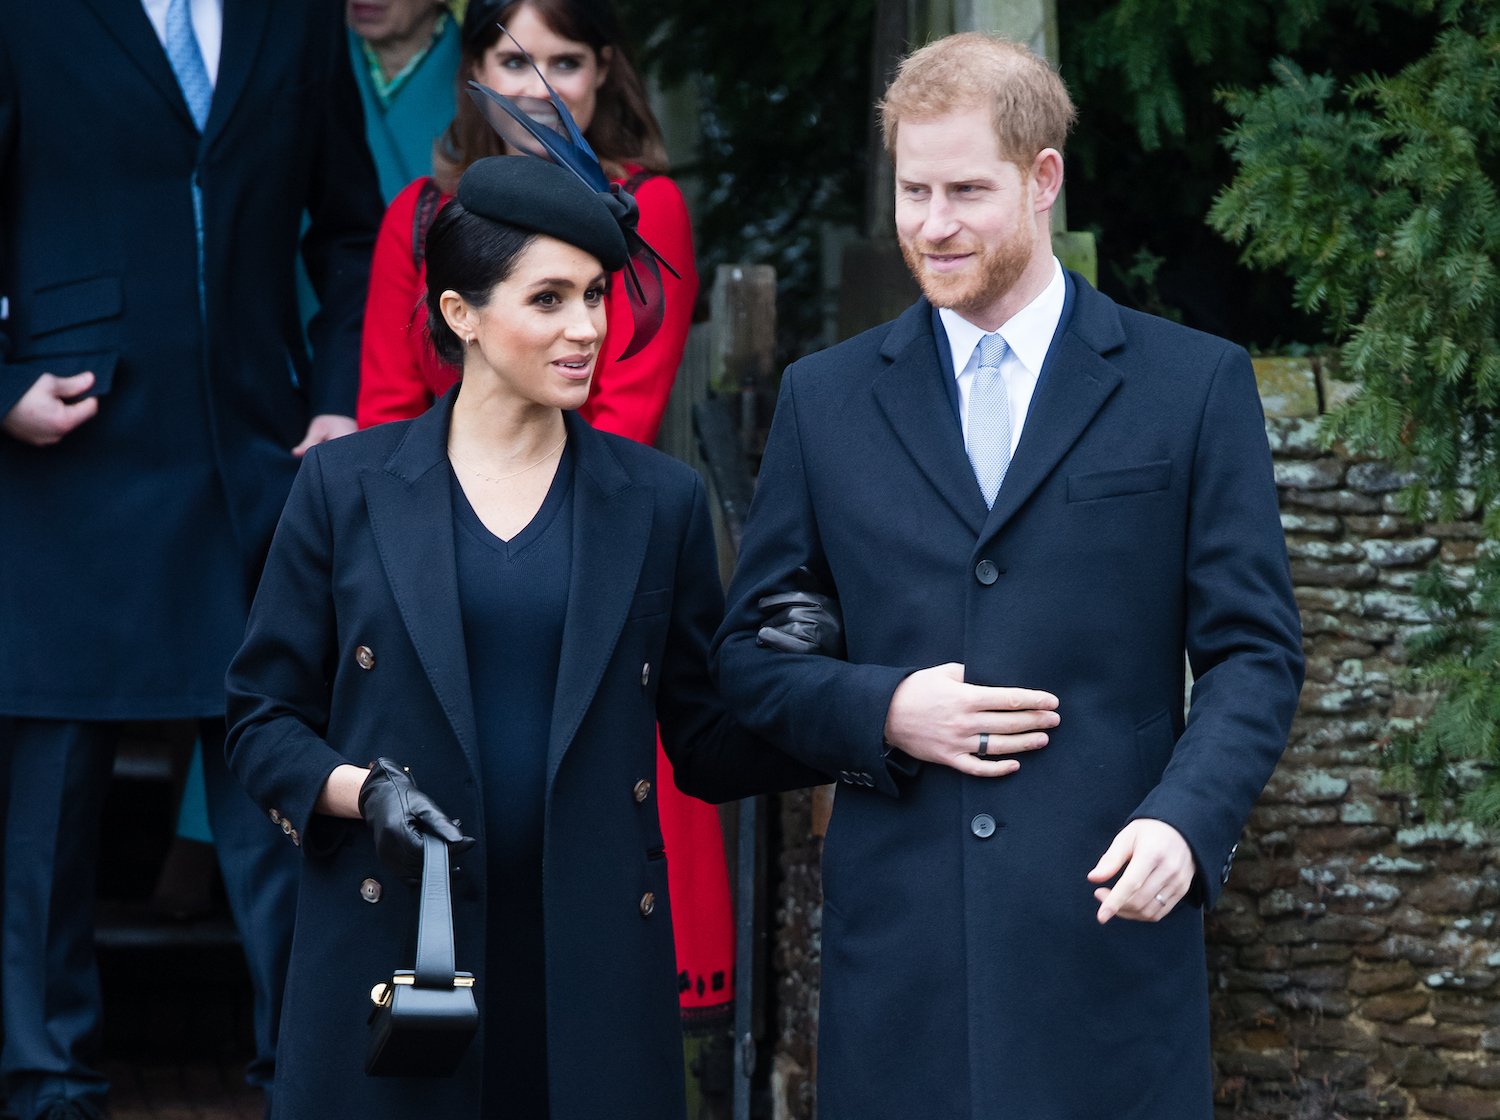 Meghan Markle and Prince Harry attend Christmas Day Church service at Church of St Mary Magdalene on the Sandringham estate